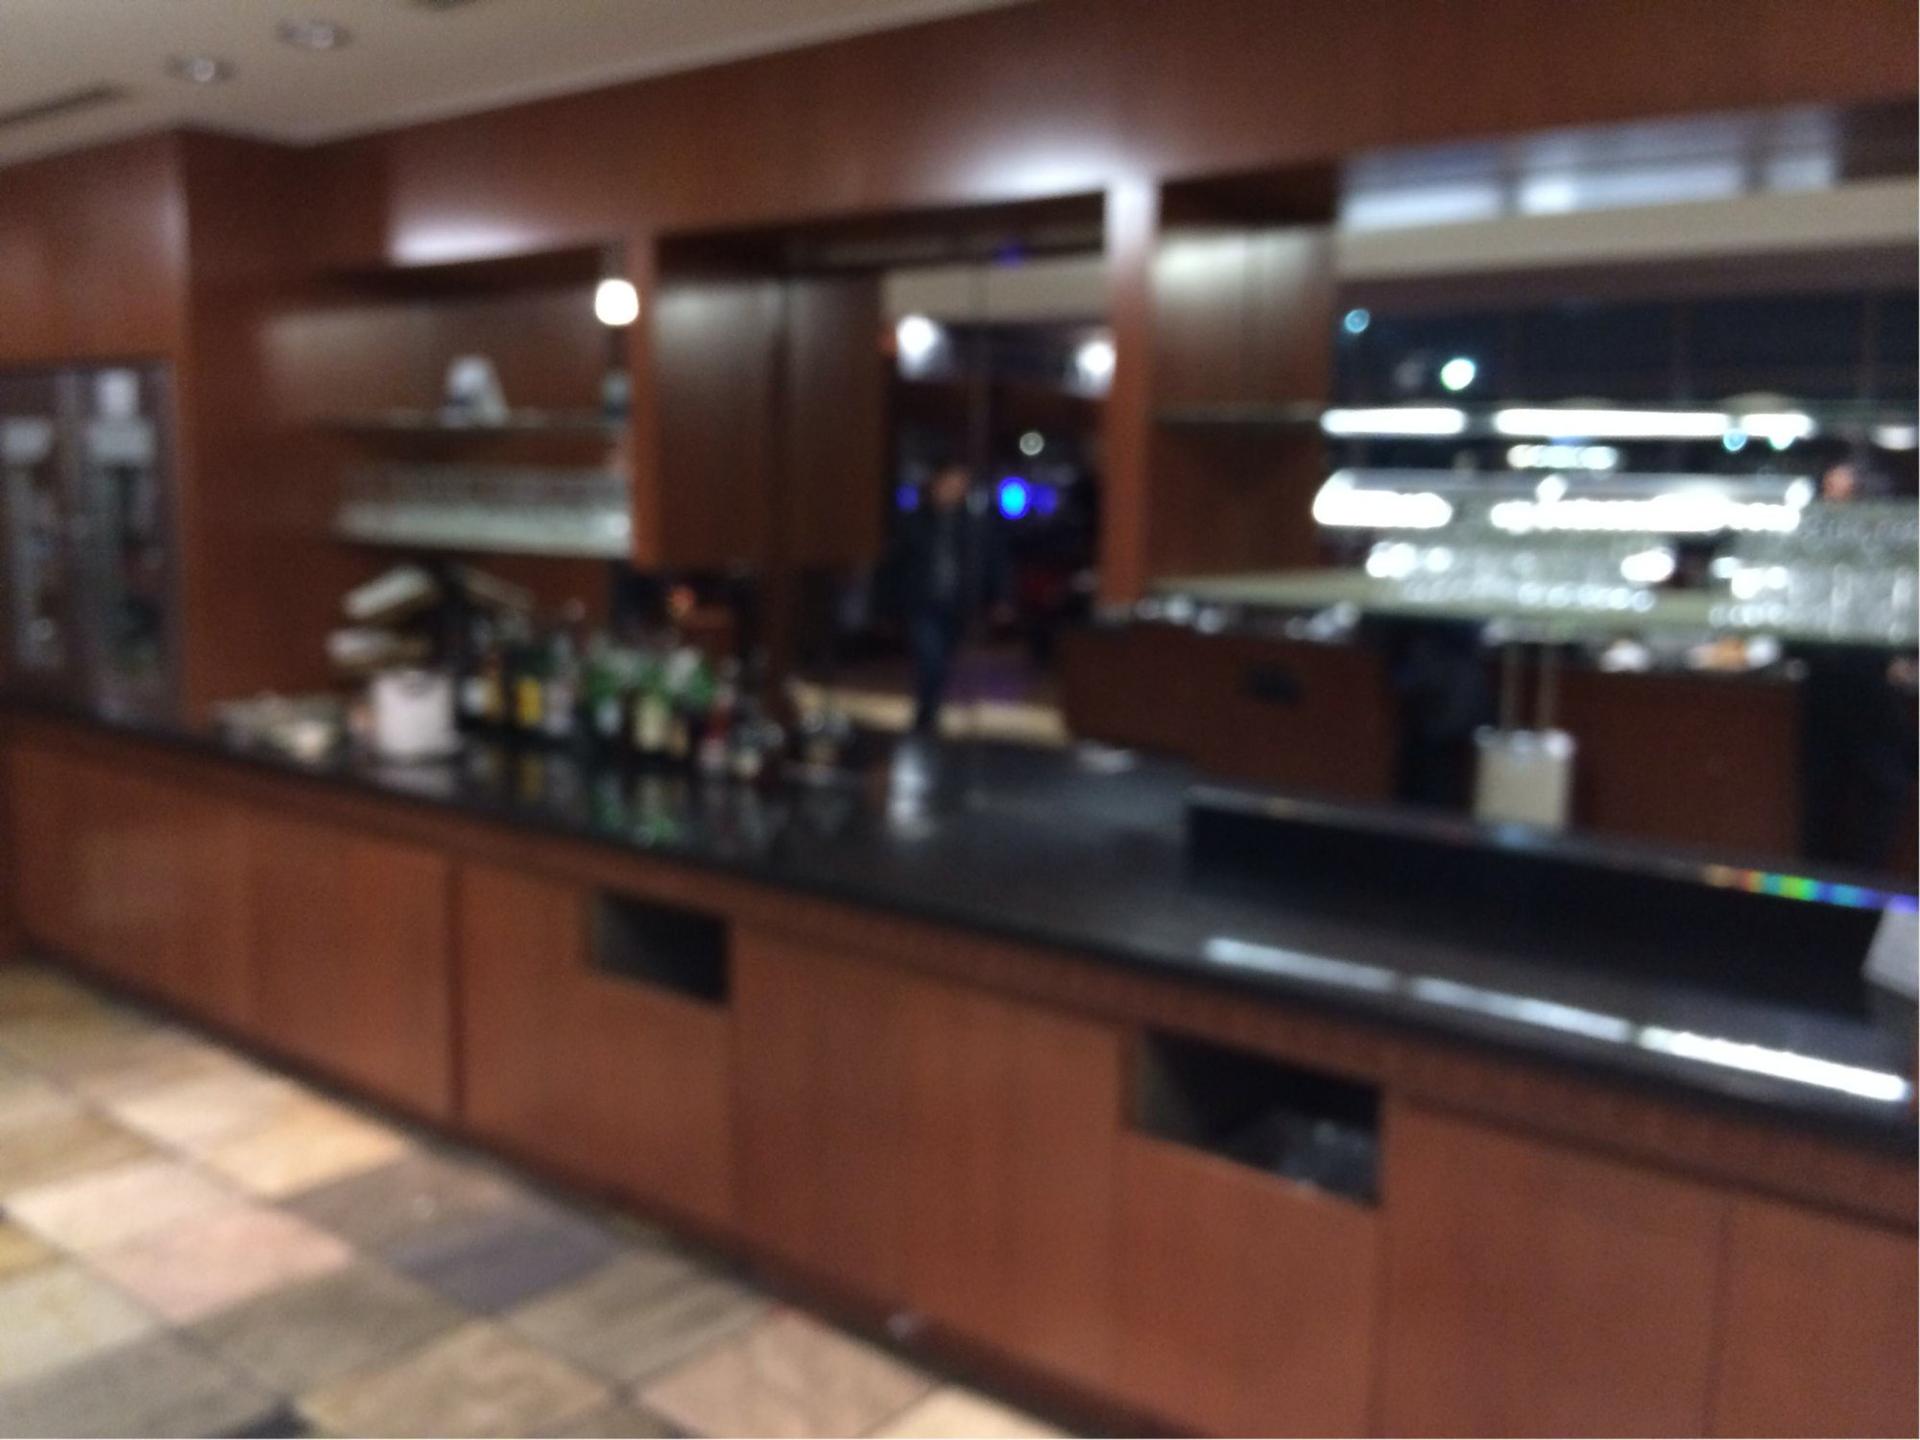 Air Canada Maple Leaf Lounge image 9 of 9